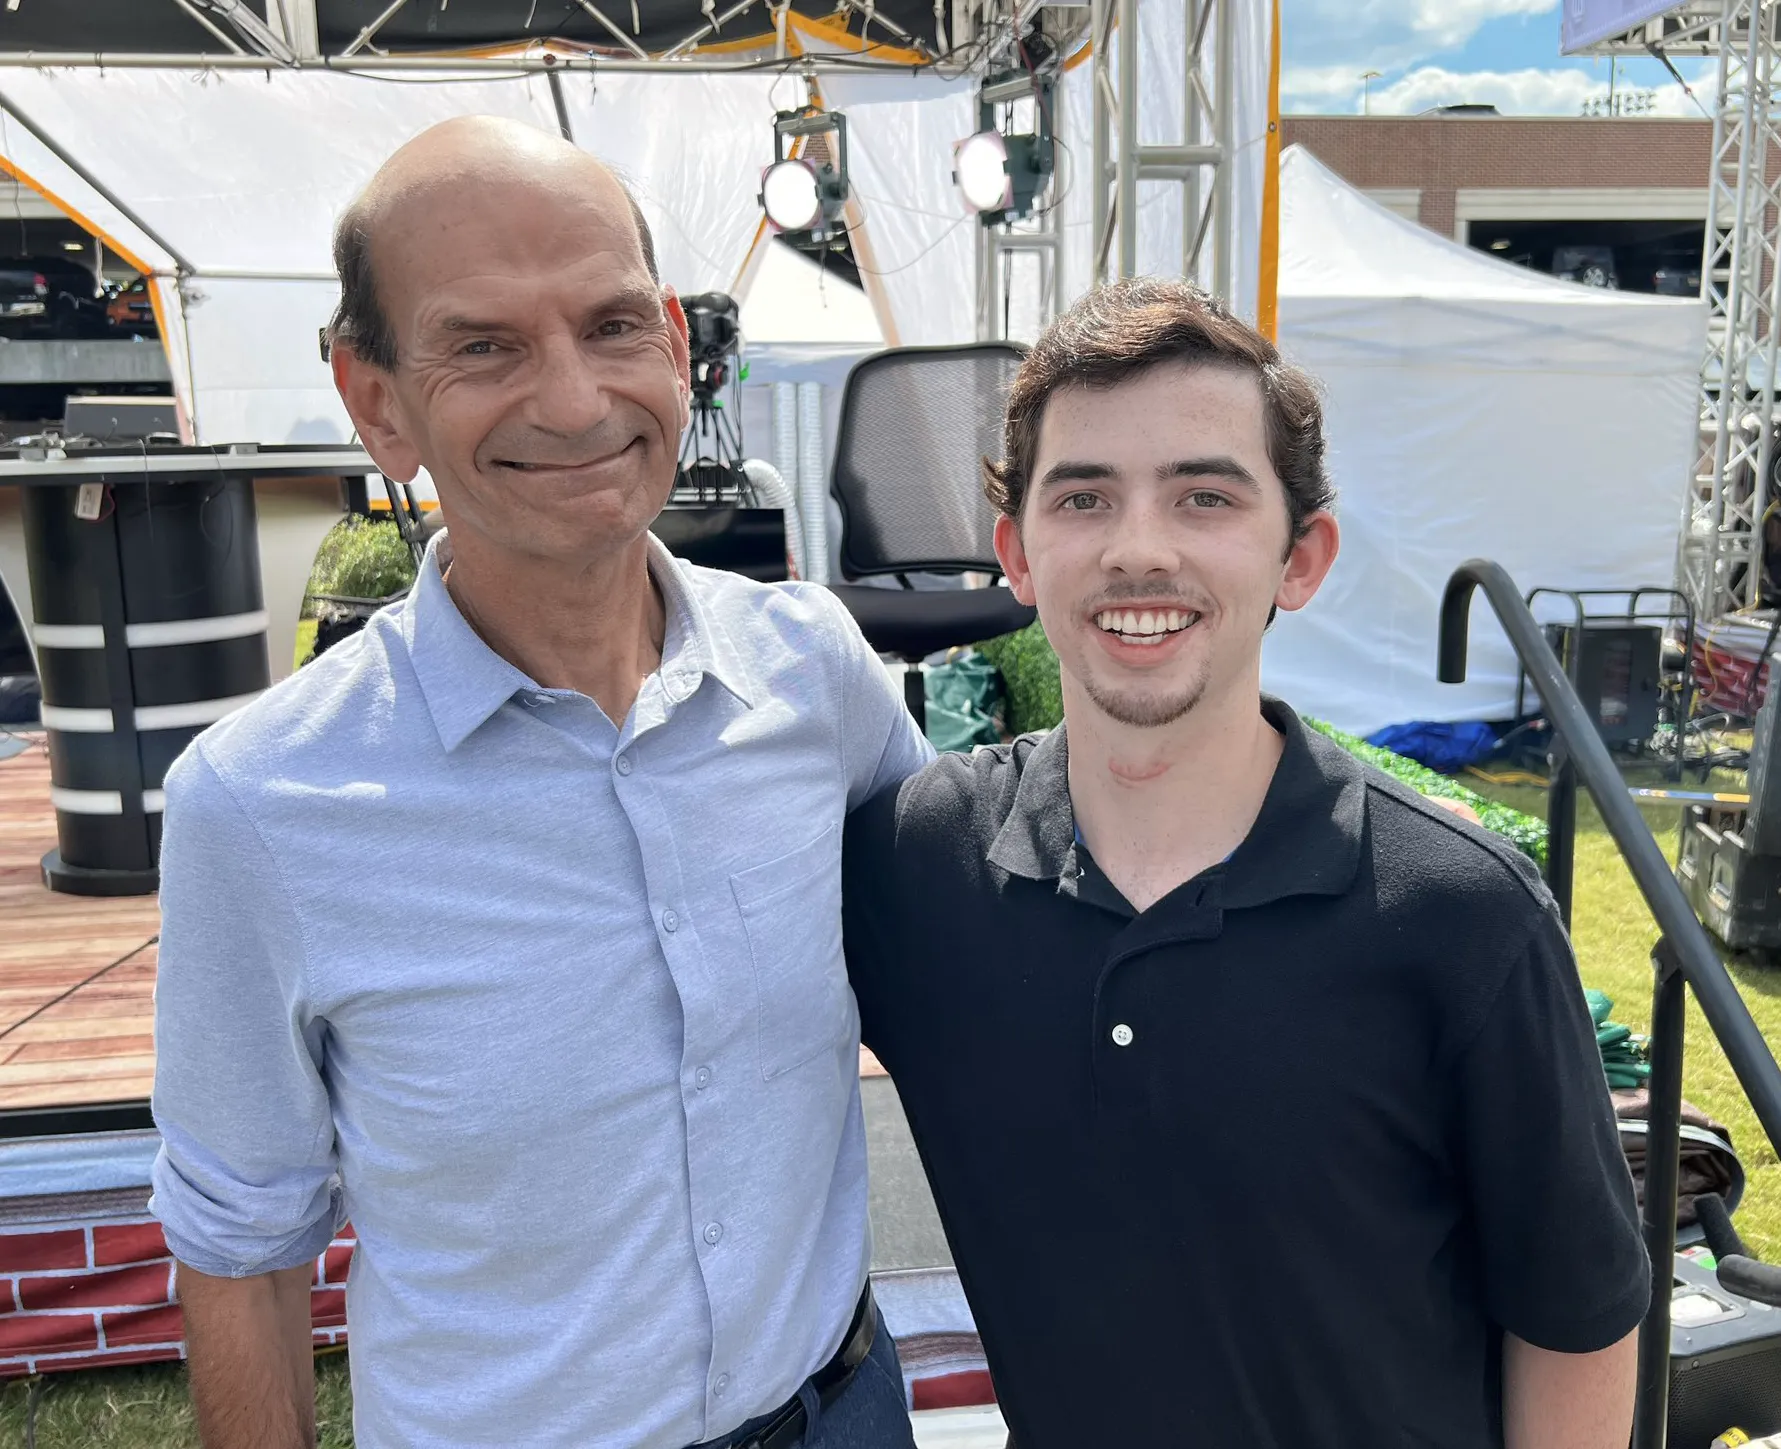 Noah Grifith smiling with Paul Finebaum with set in background